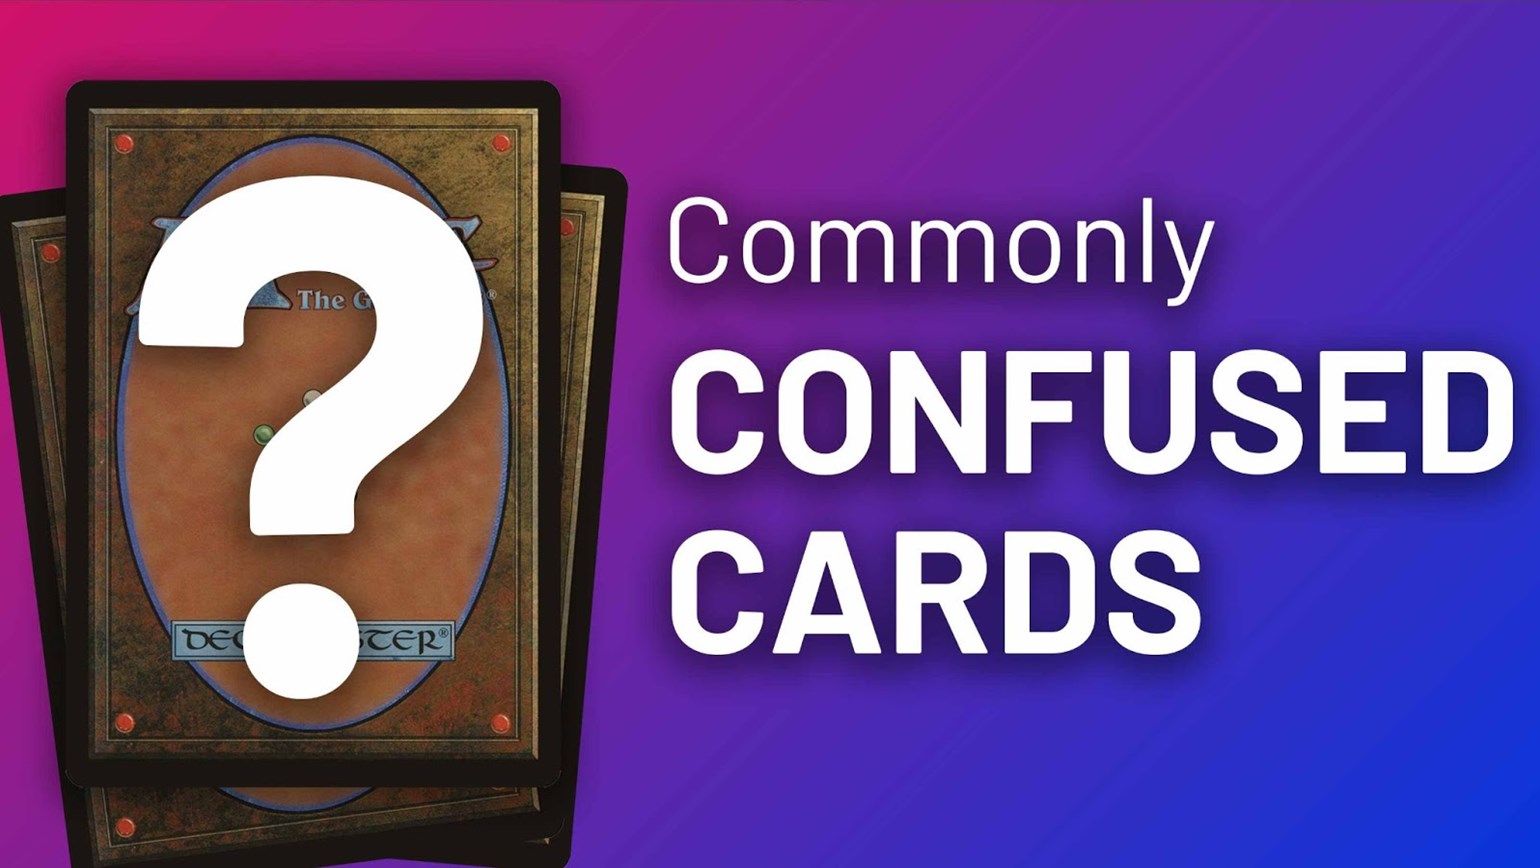 Commonly Confused Cards